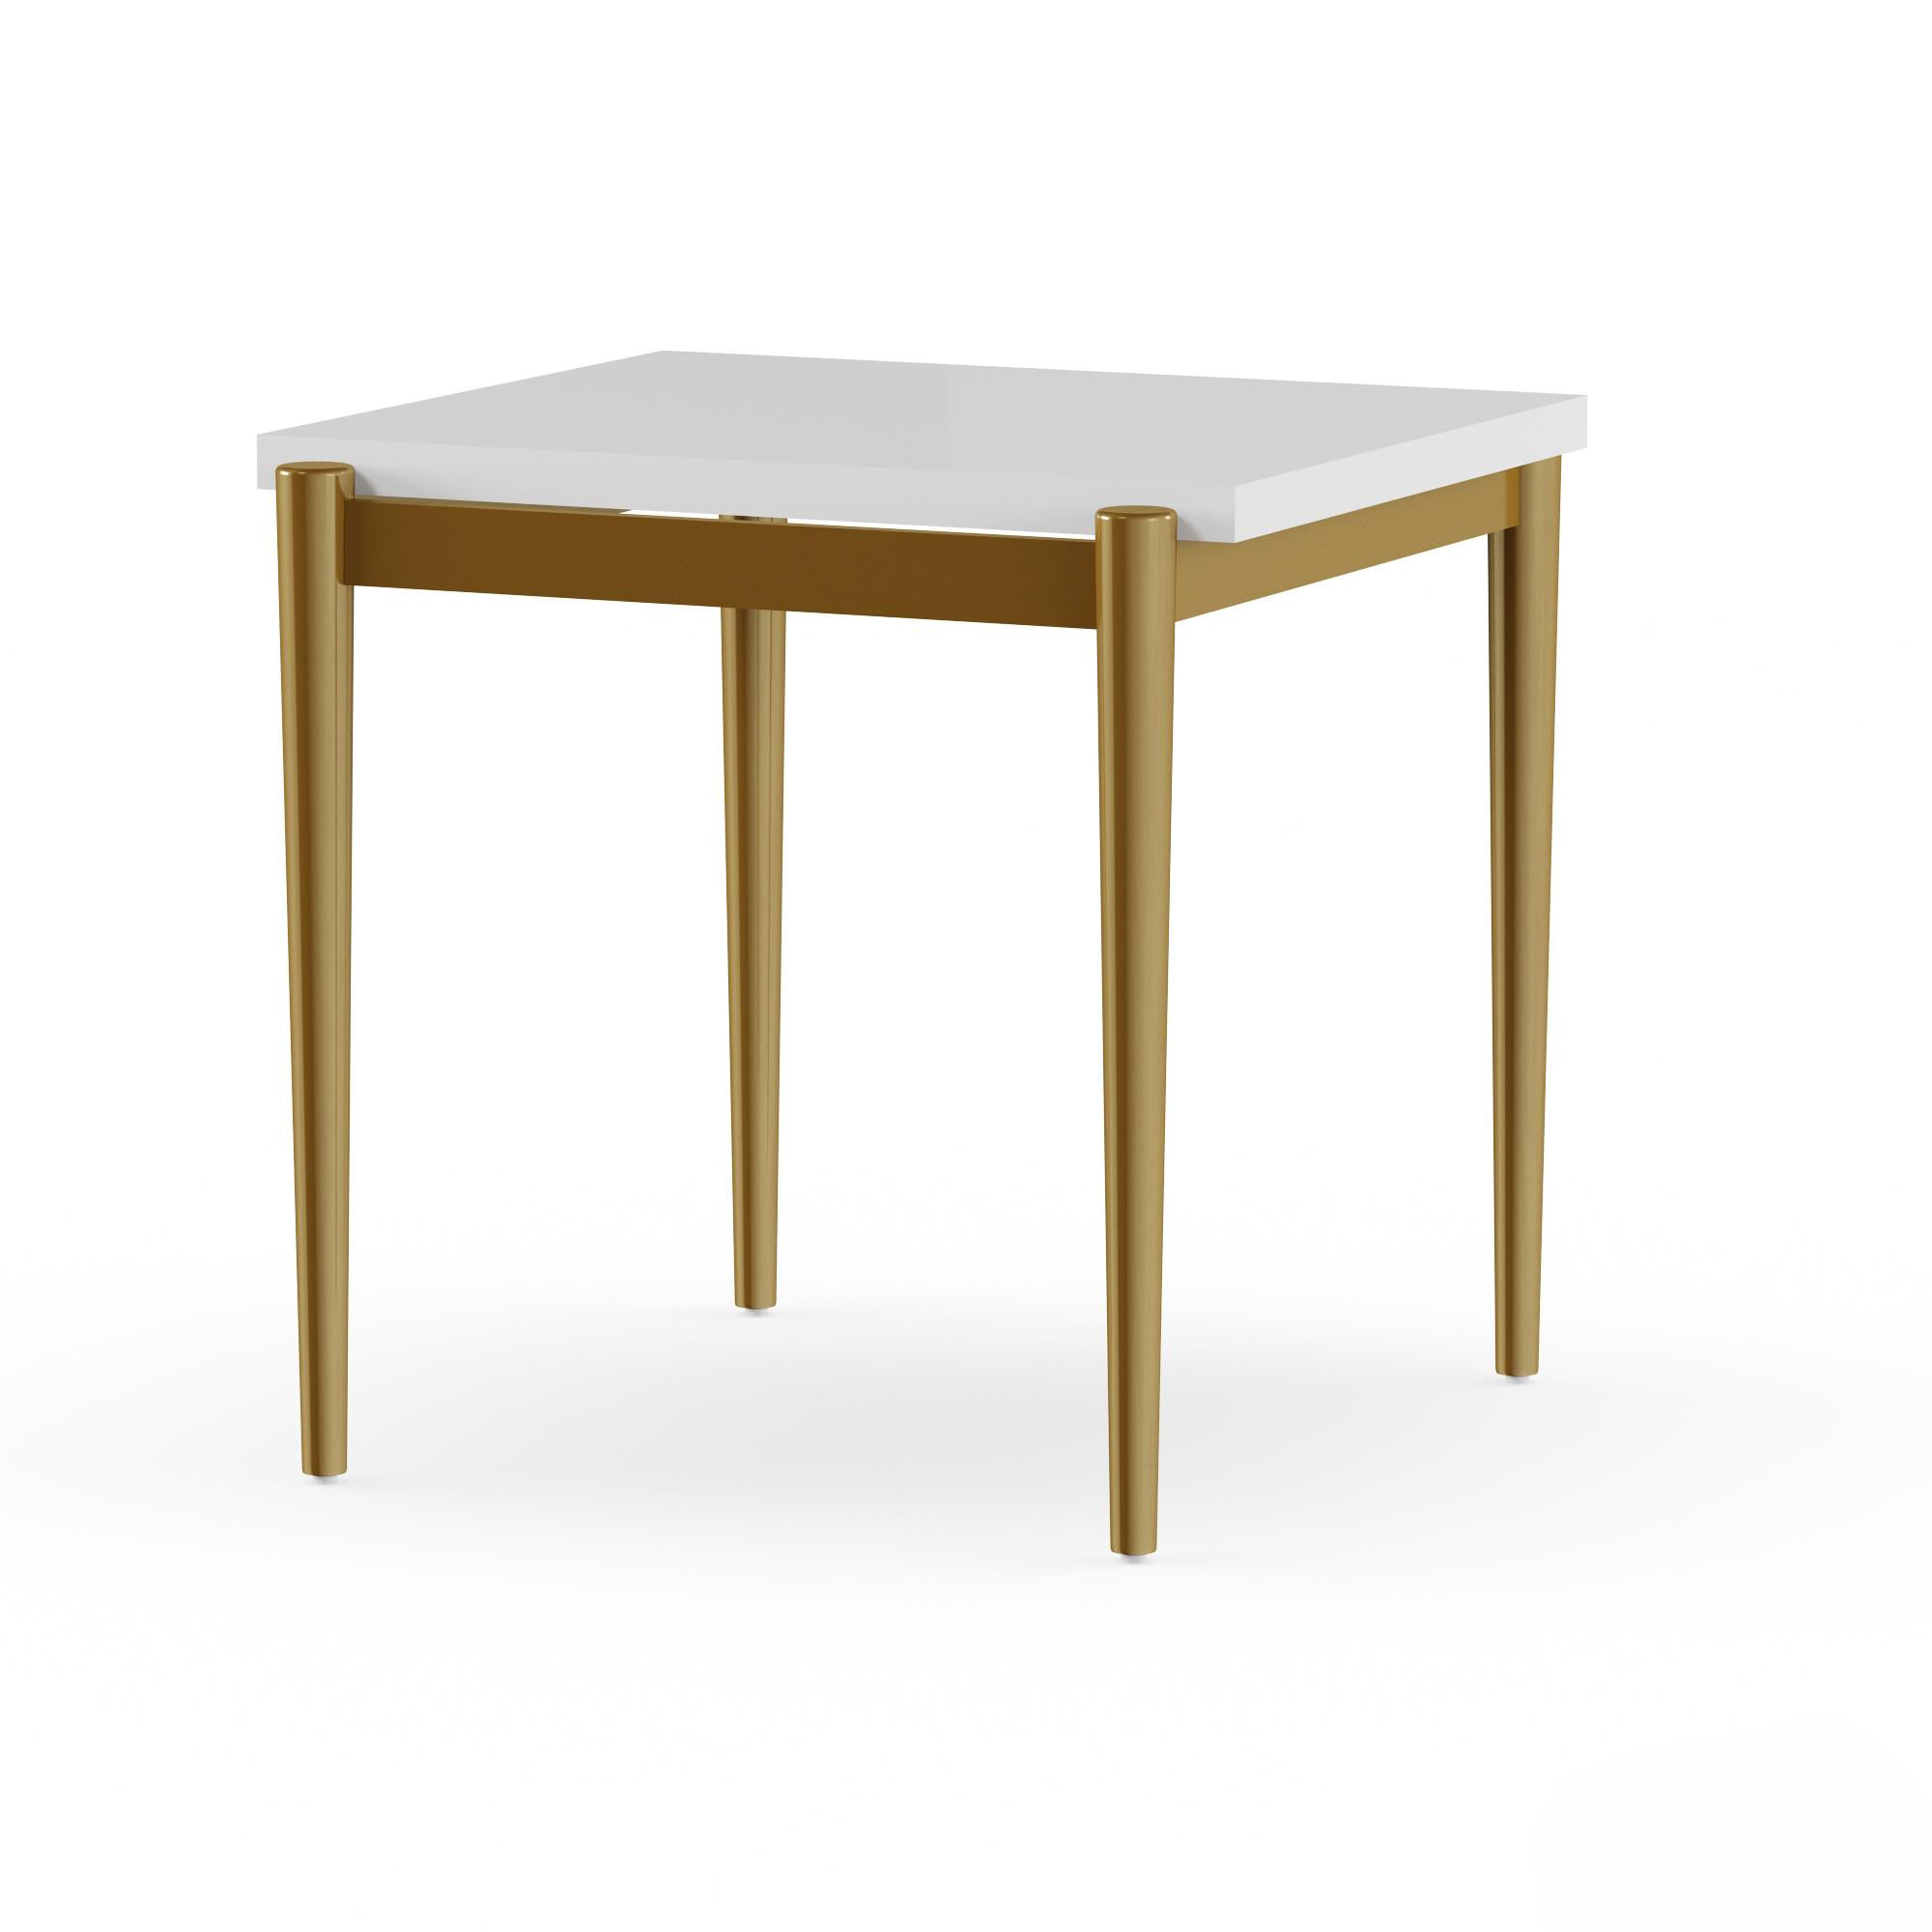 MoDRN Neo Luxury Dylan End Table - image 3 of 7